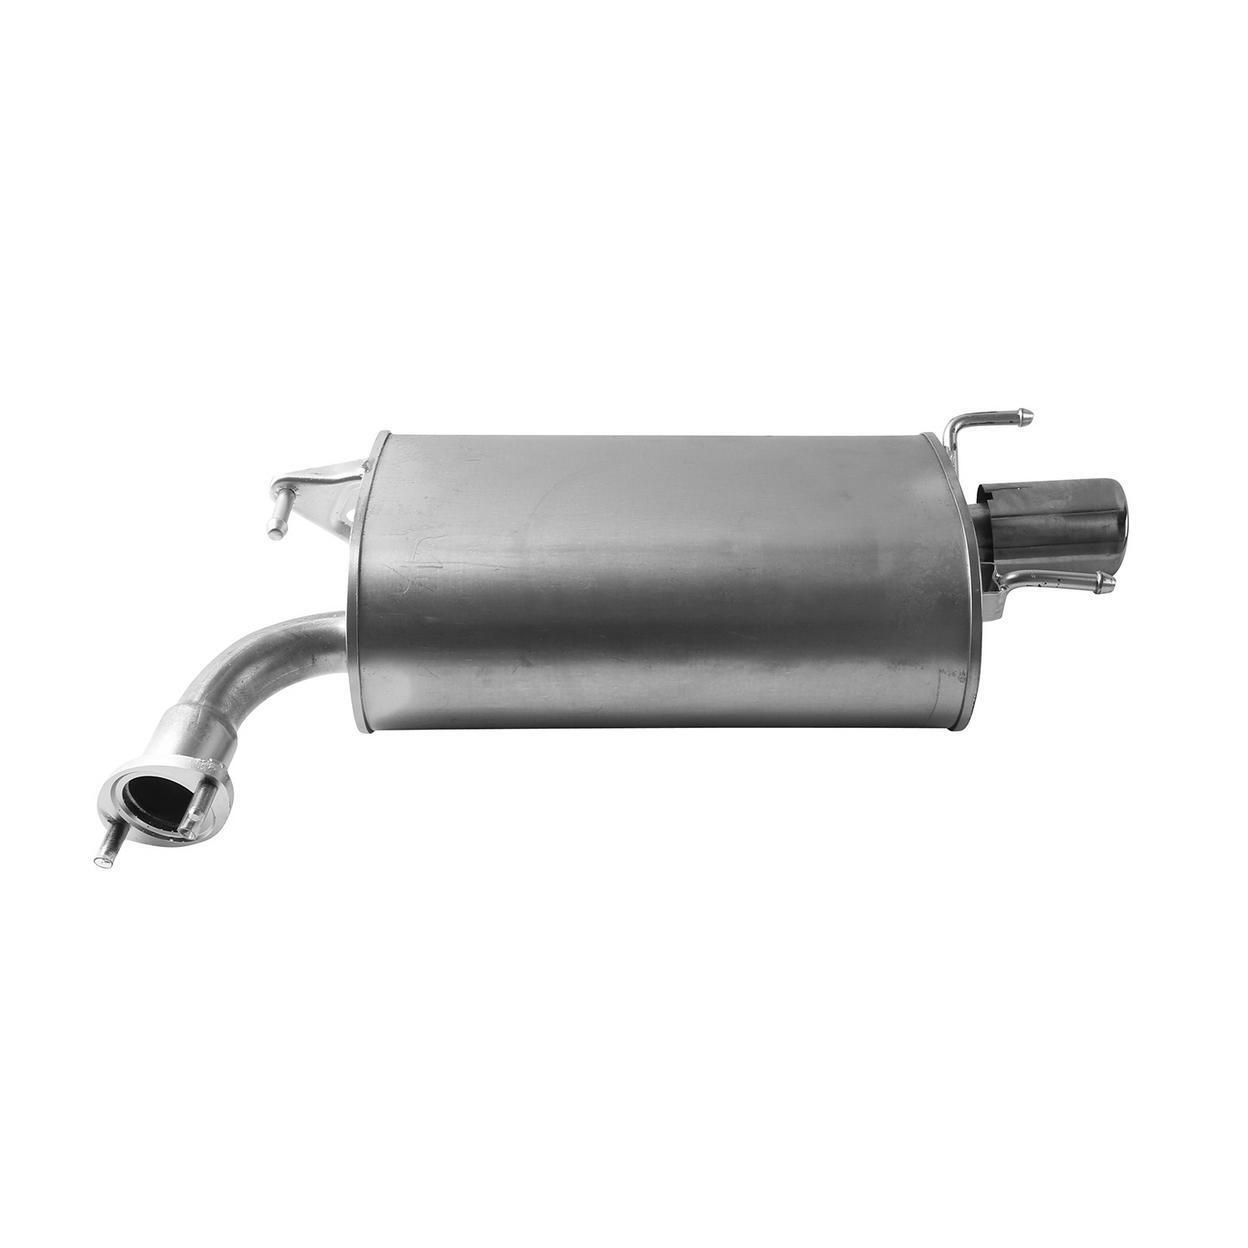 Exhaust Muffler for 2007-2010 Toyota Camry Hybrid 2.4L L4 ELECTRIC/GAS DOHC